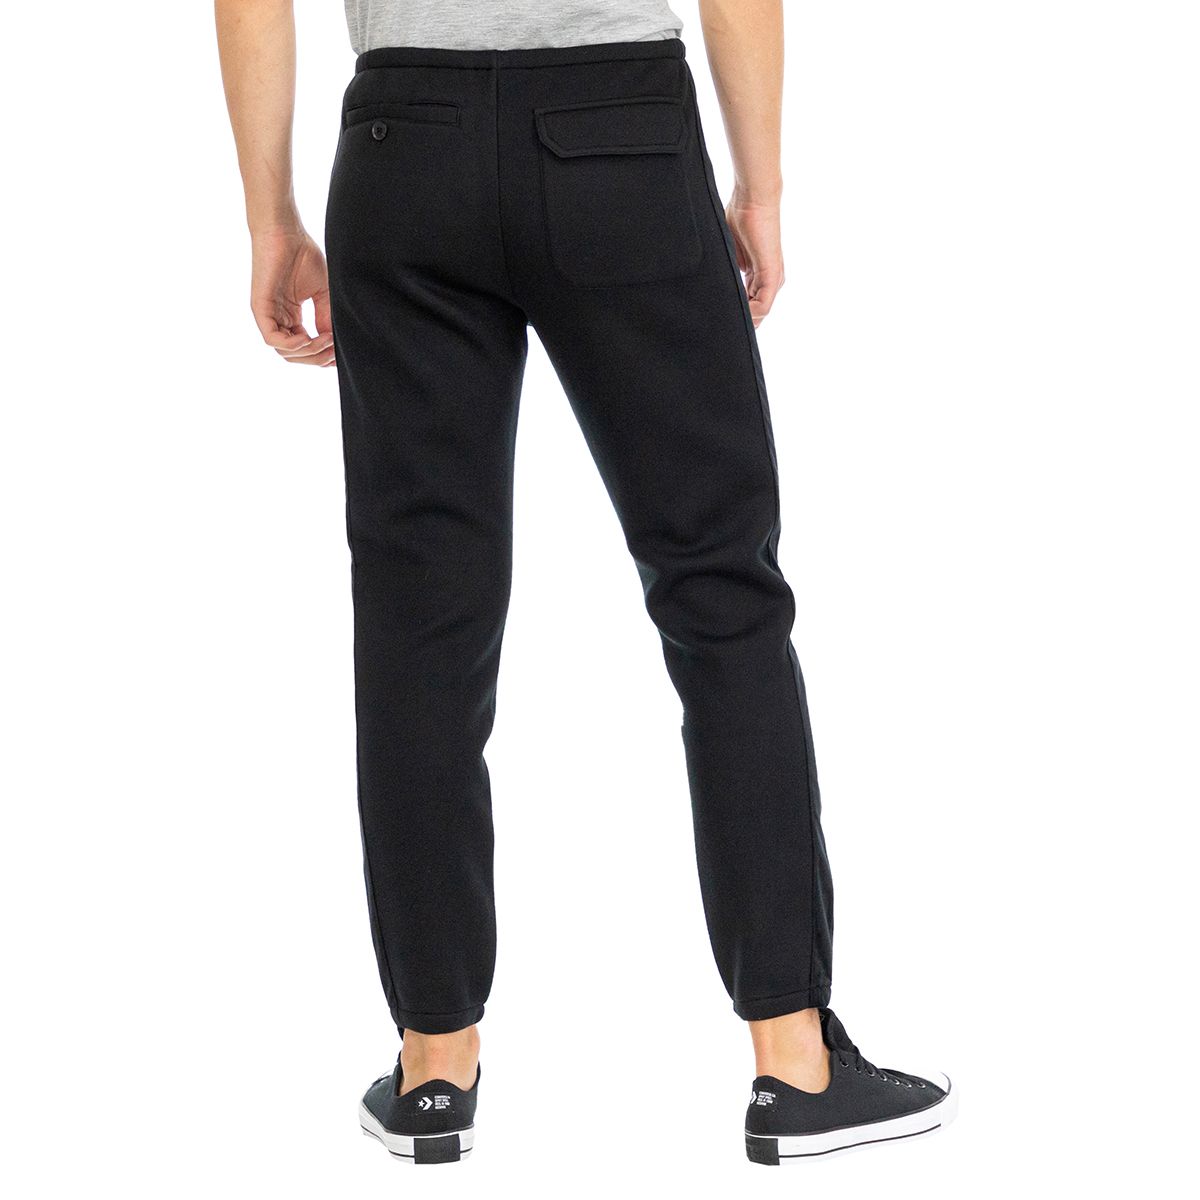 Emporio Armani 6Z1PP51JTTZ-0999-XL Comfortable and trendy, these black pants will complement any casual look.